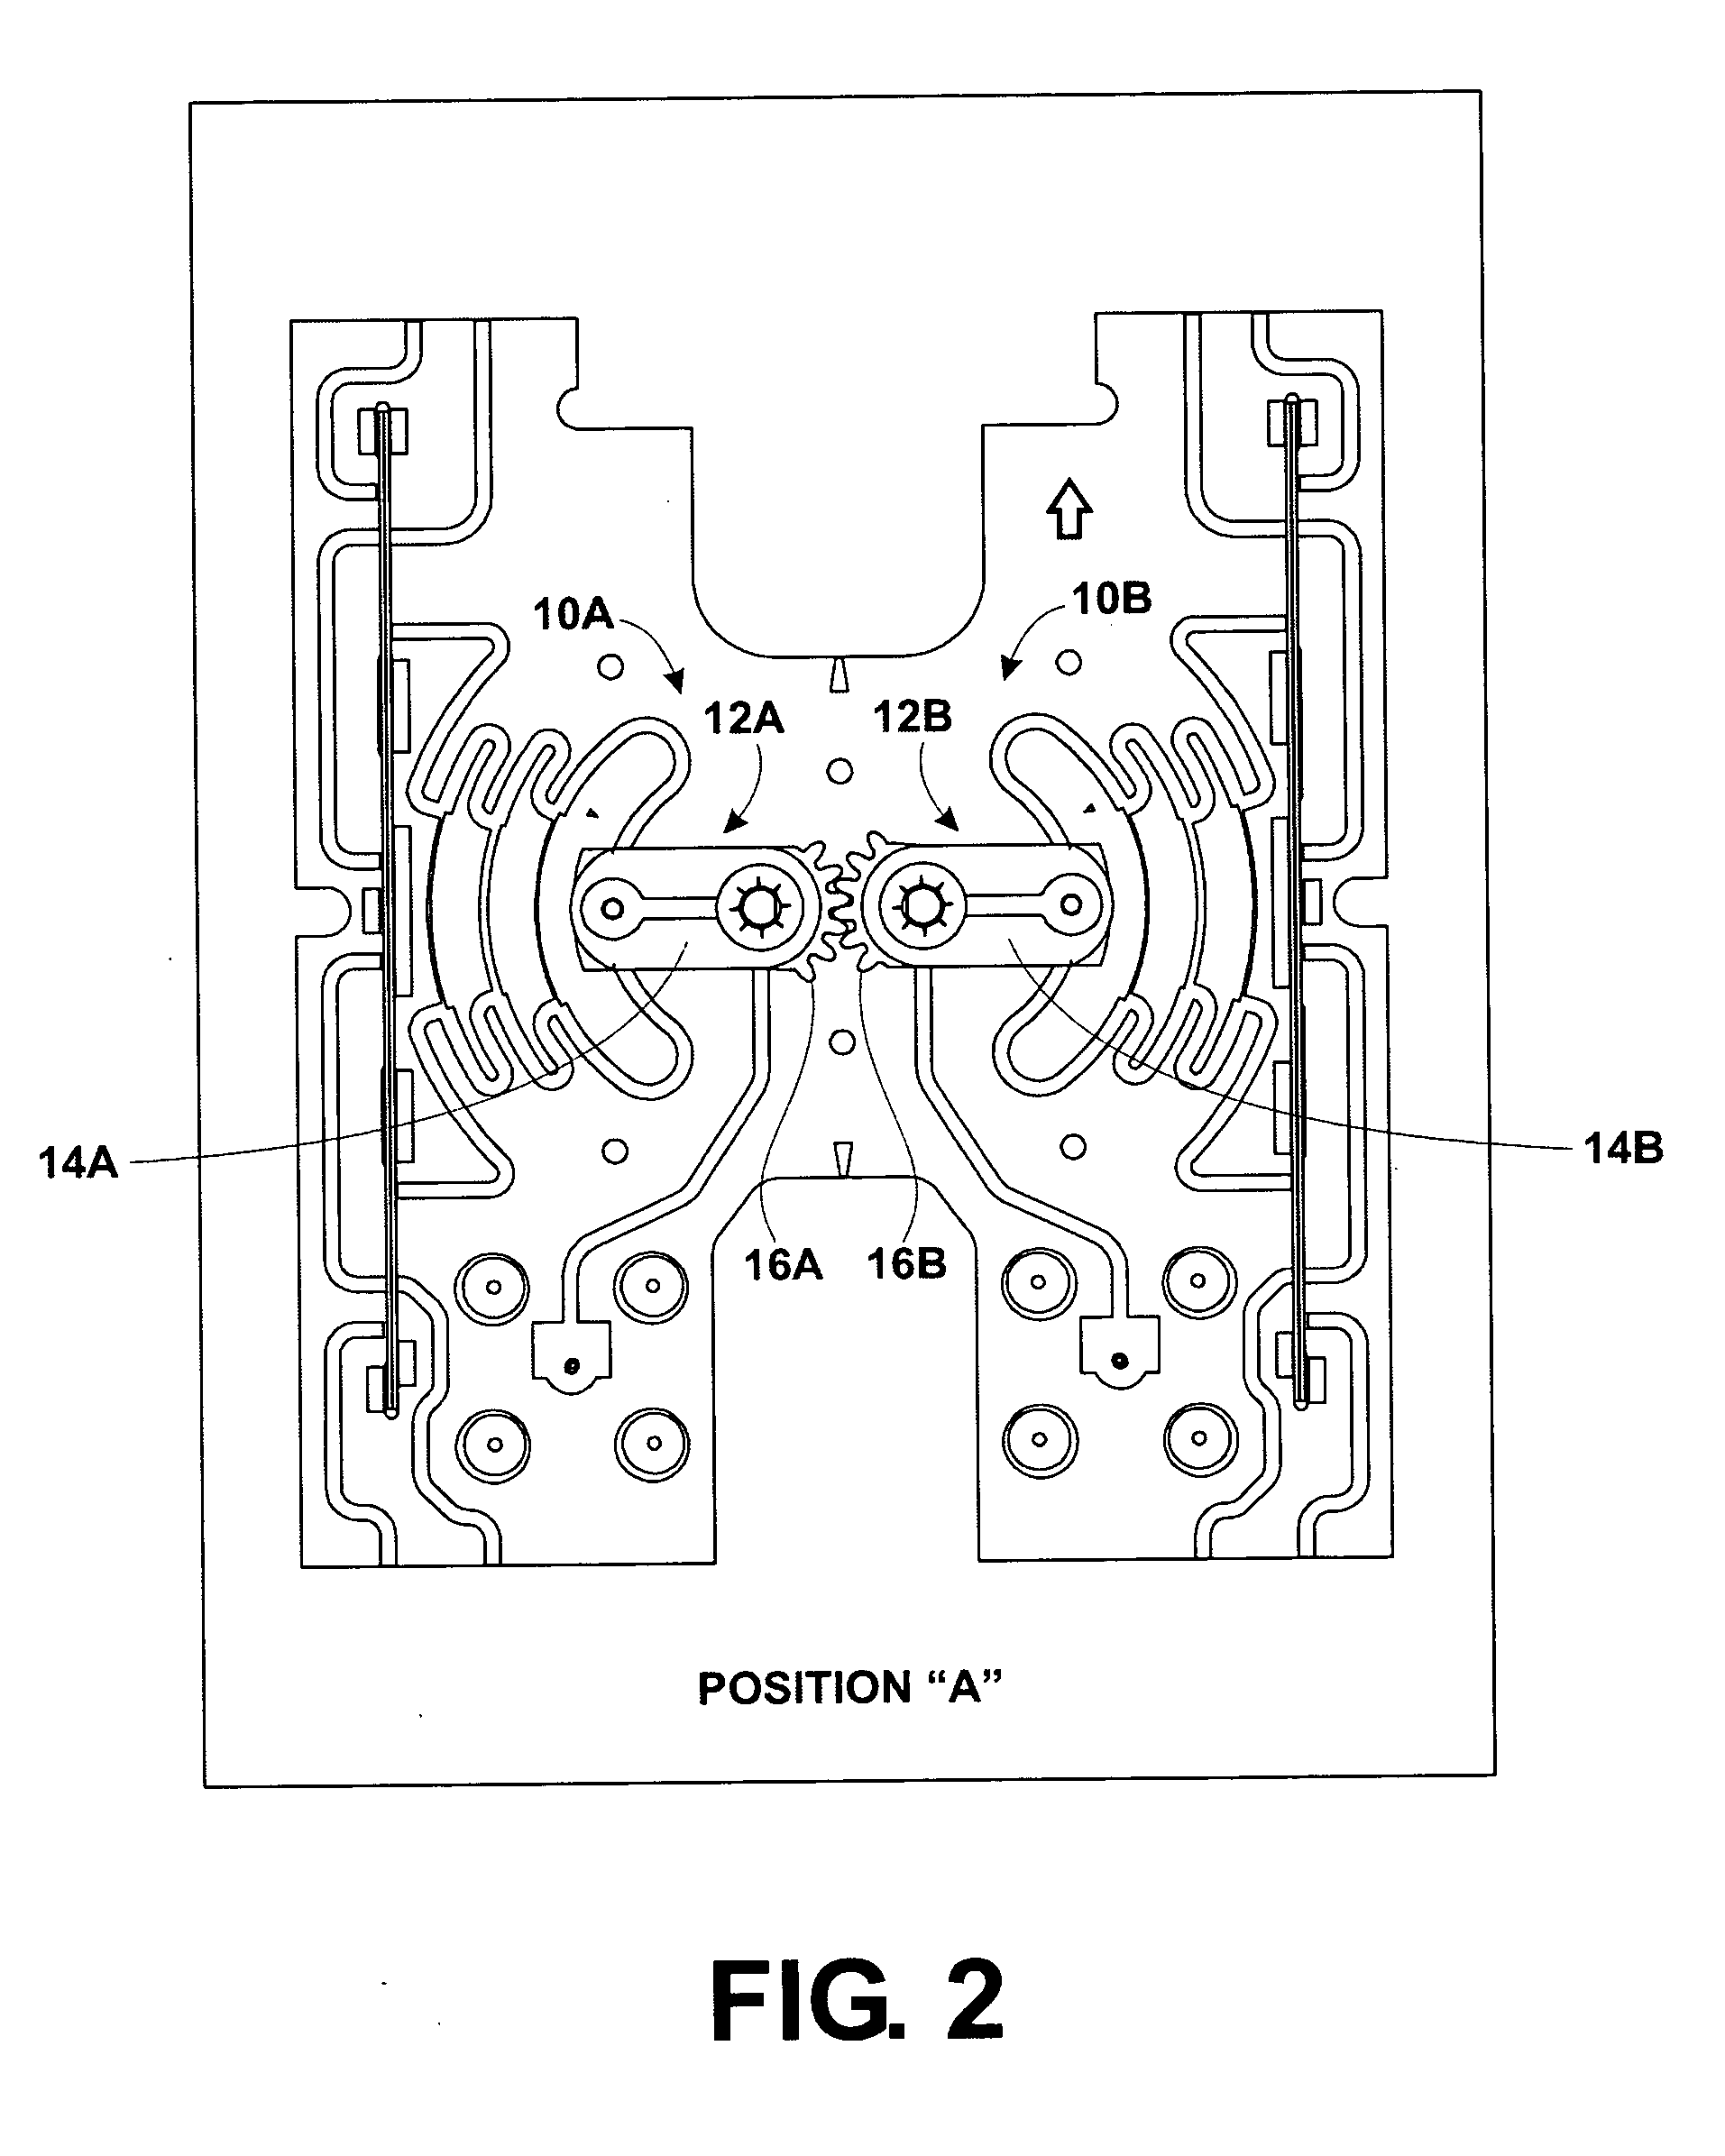 Wiper-type phase shifter with cantilever shoe and dual-polarization antenna with commonly driven phase shifters